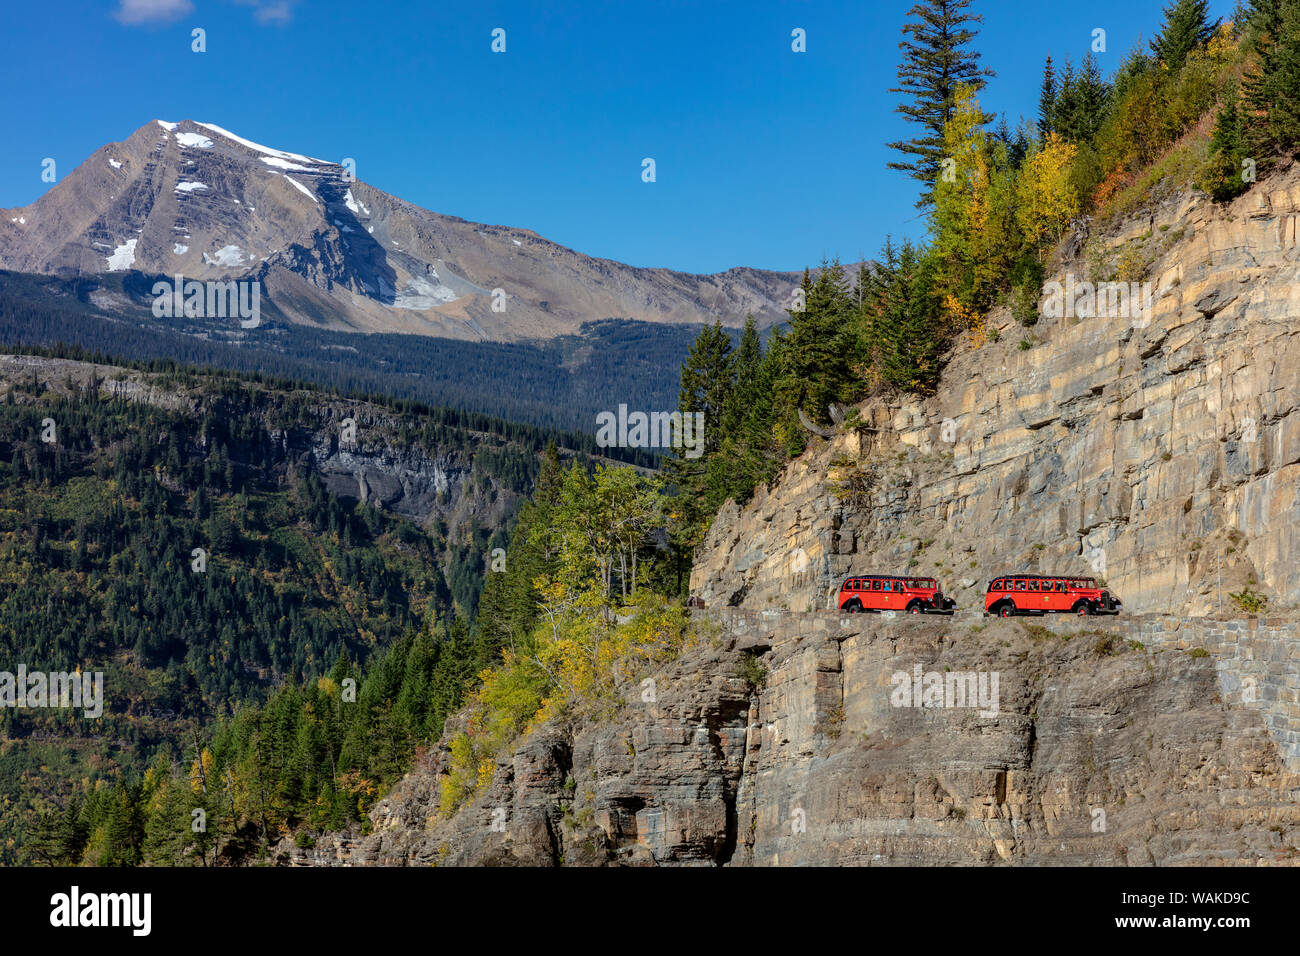 Red Jammer buses on going to the Sun Road with Heavens Peak in Glacier National Park, Montana, USA Stock Photo